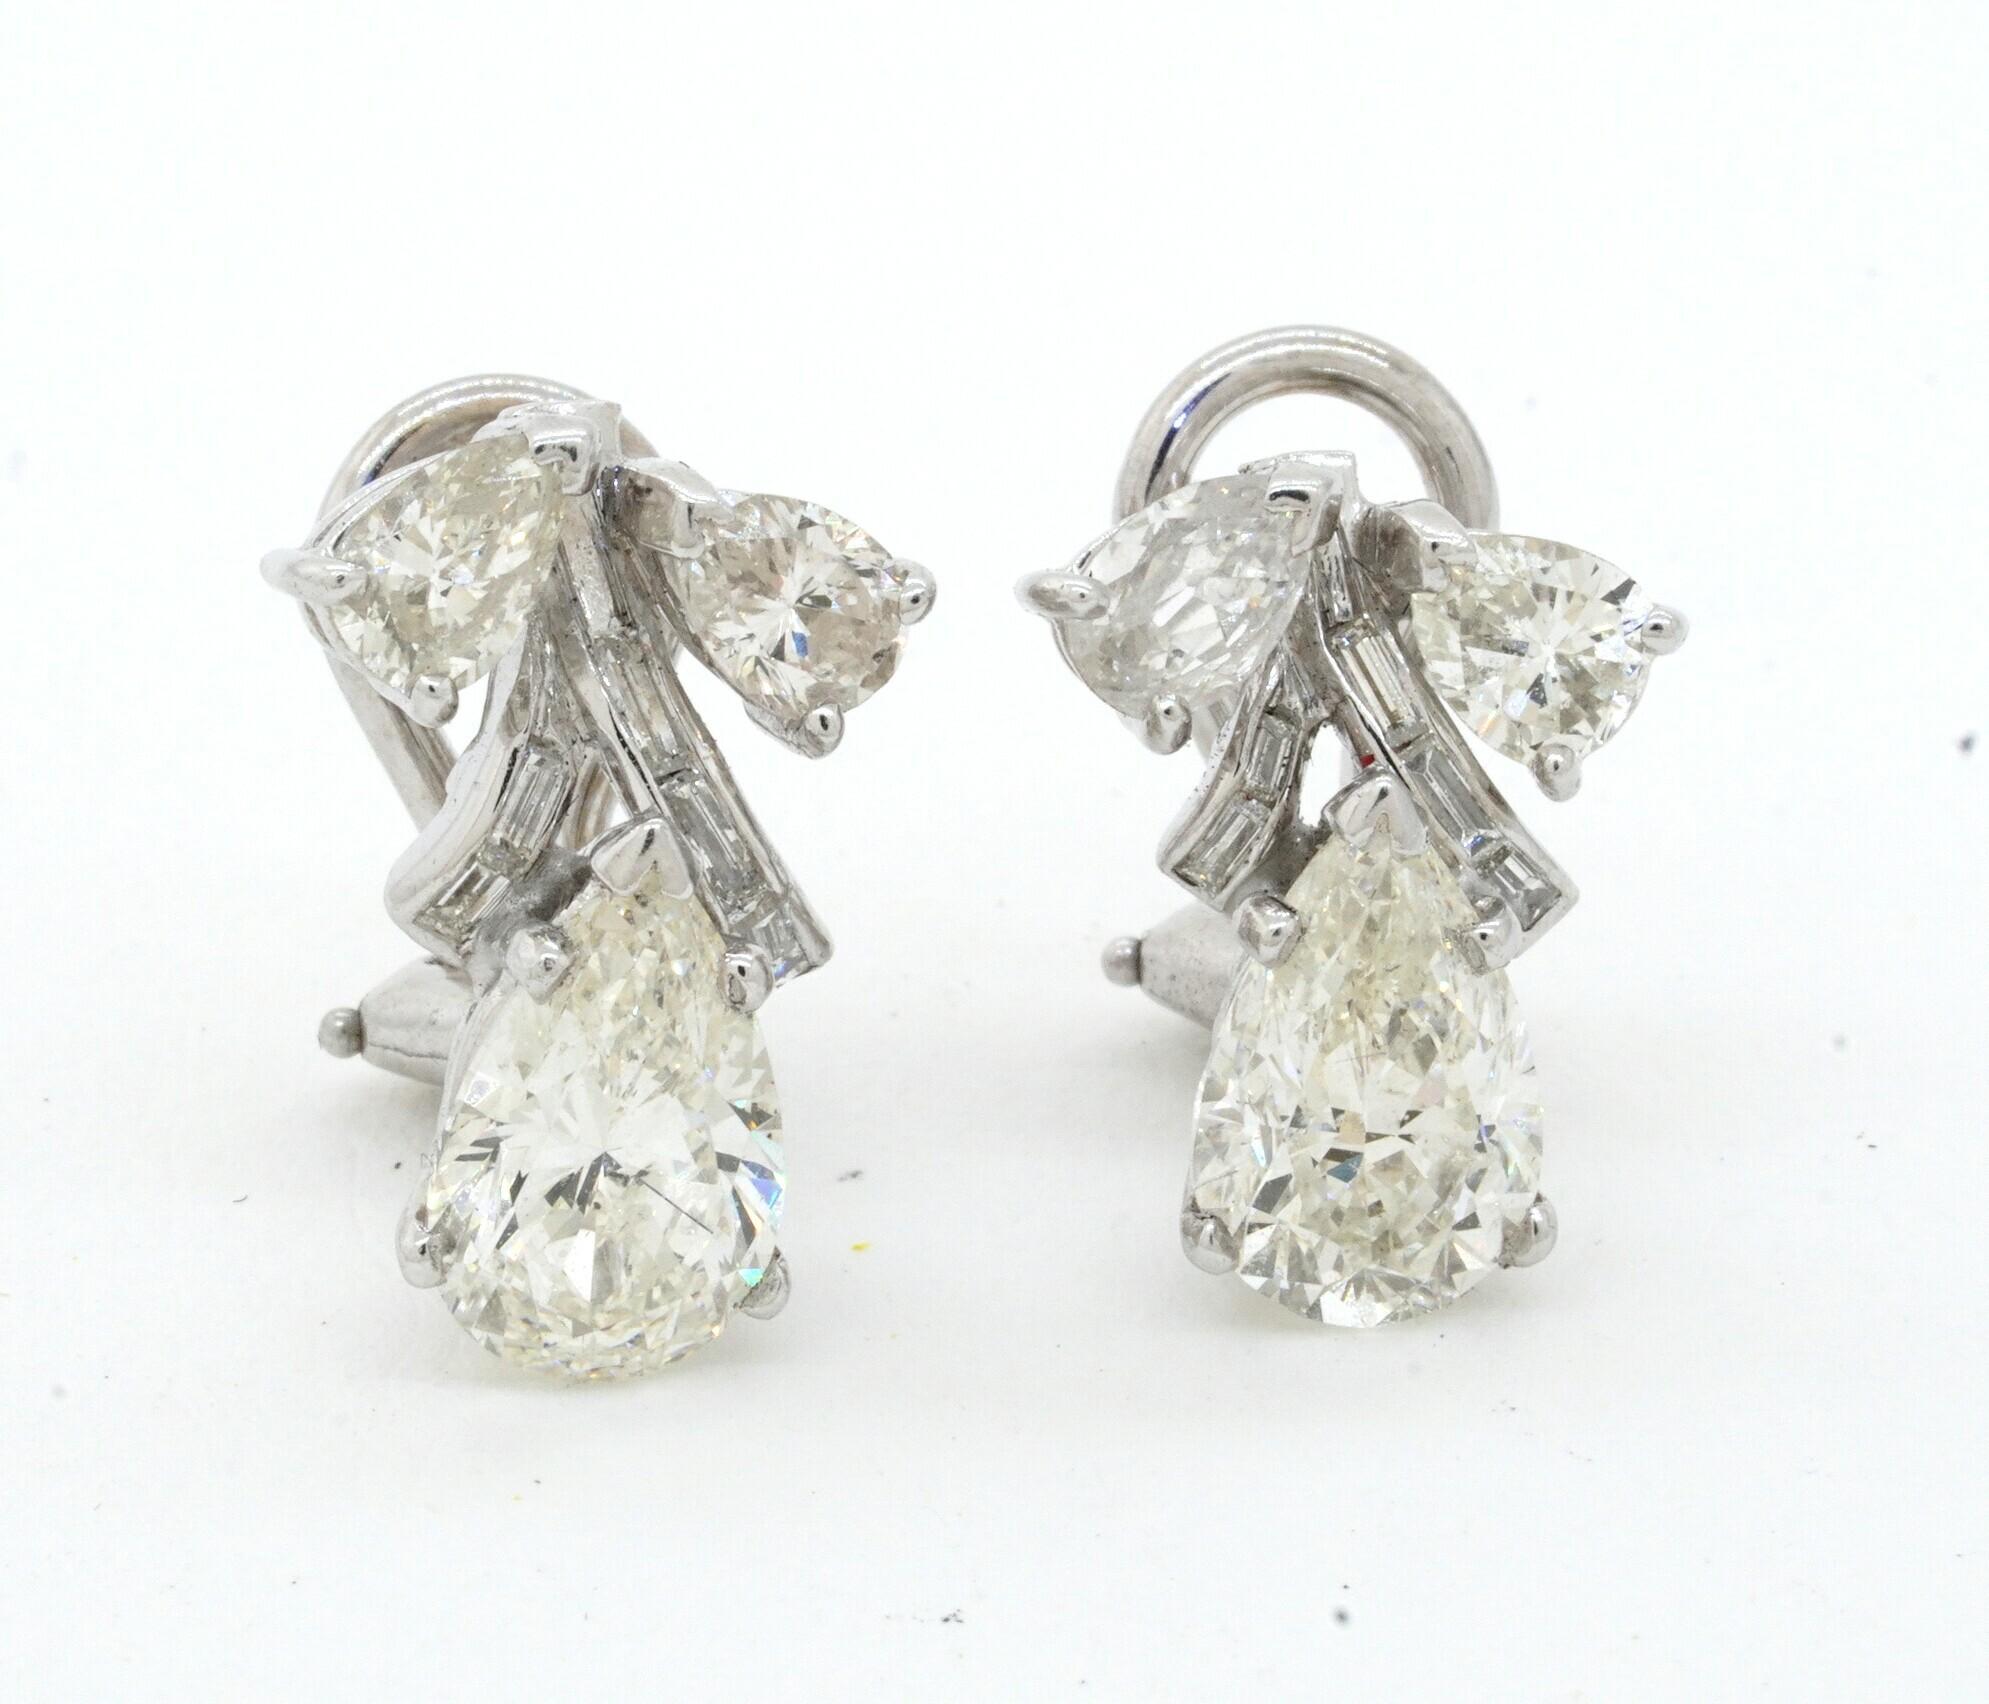 EGL USA 1950s Platinum 4.54CT VS-SI Pear diamond earrings w/ approx. 1.5CT ctrs. This extraordinary set of earrings are crafted in gorgeous Platinum and feature 16 diamonds, with a combined weight of approx. 4.54CT. This includes EGL USA certified